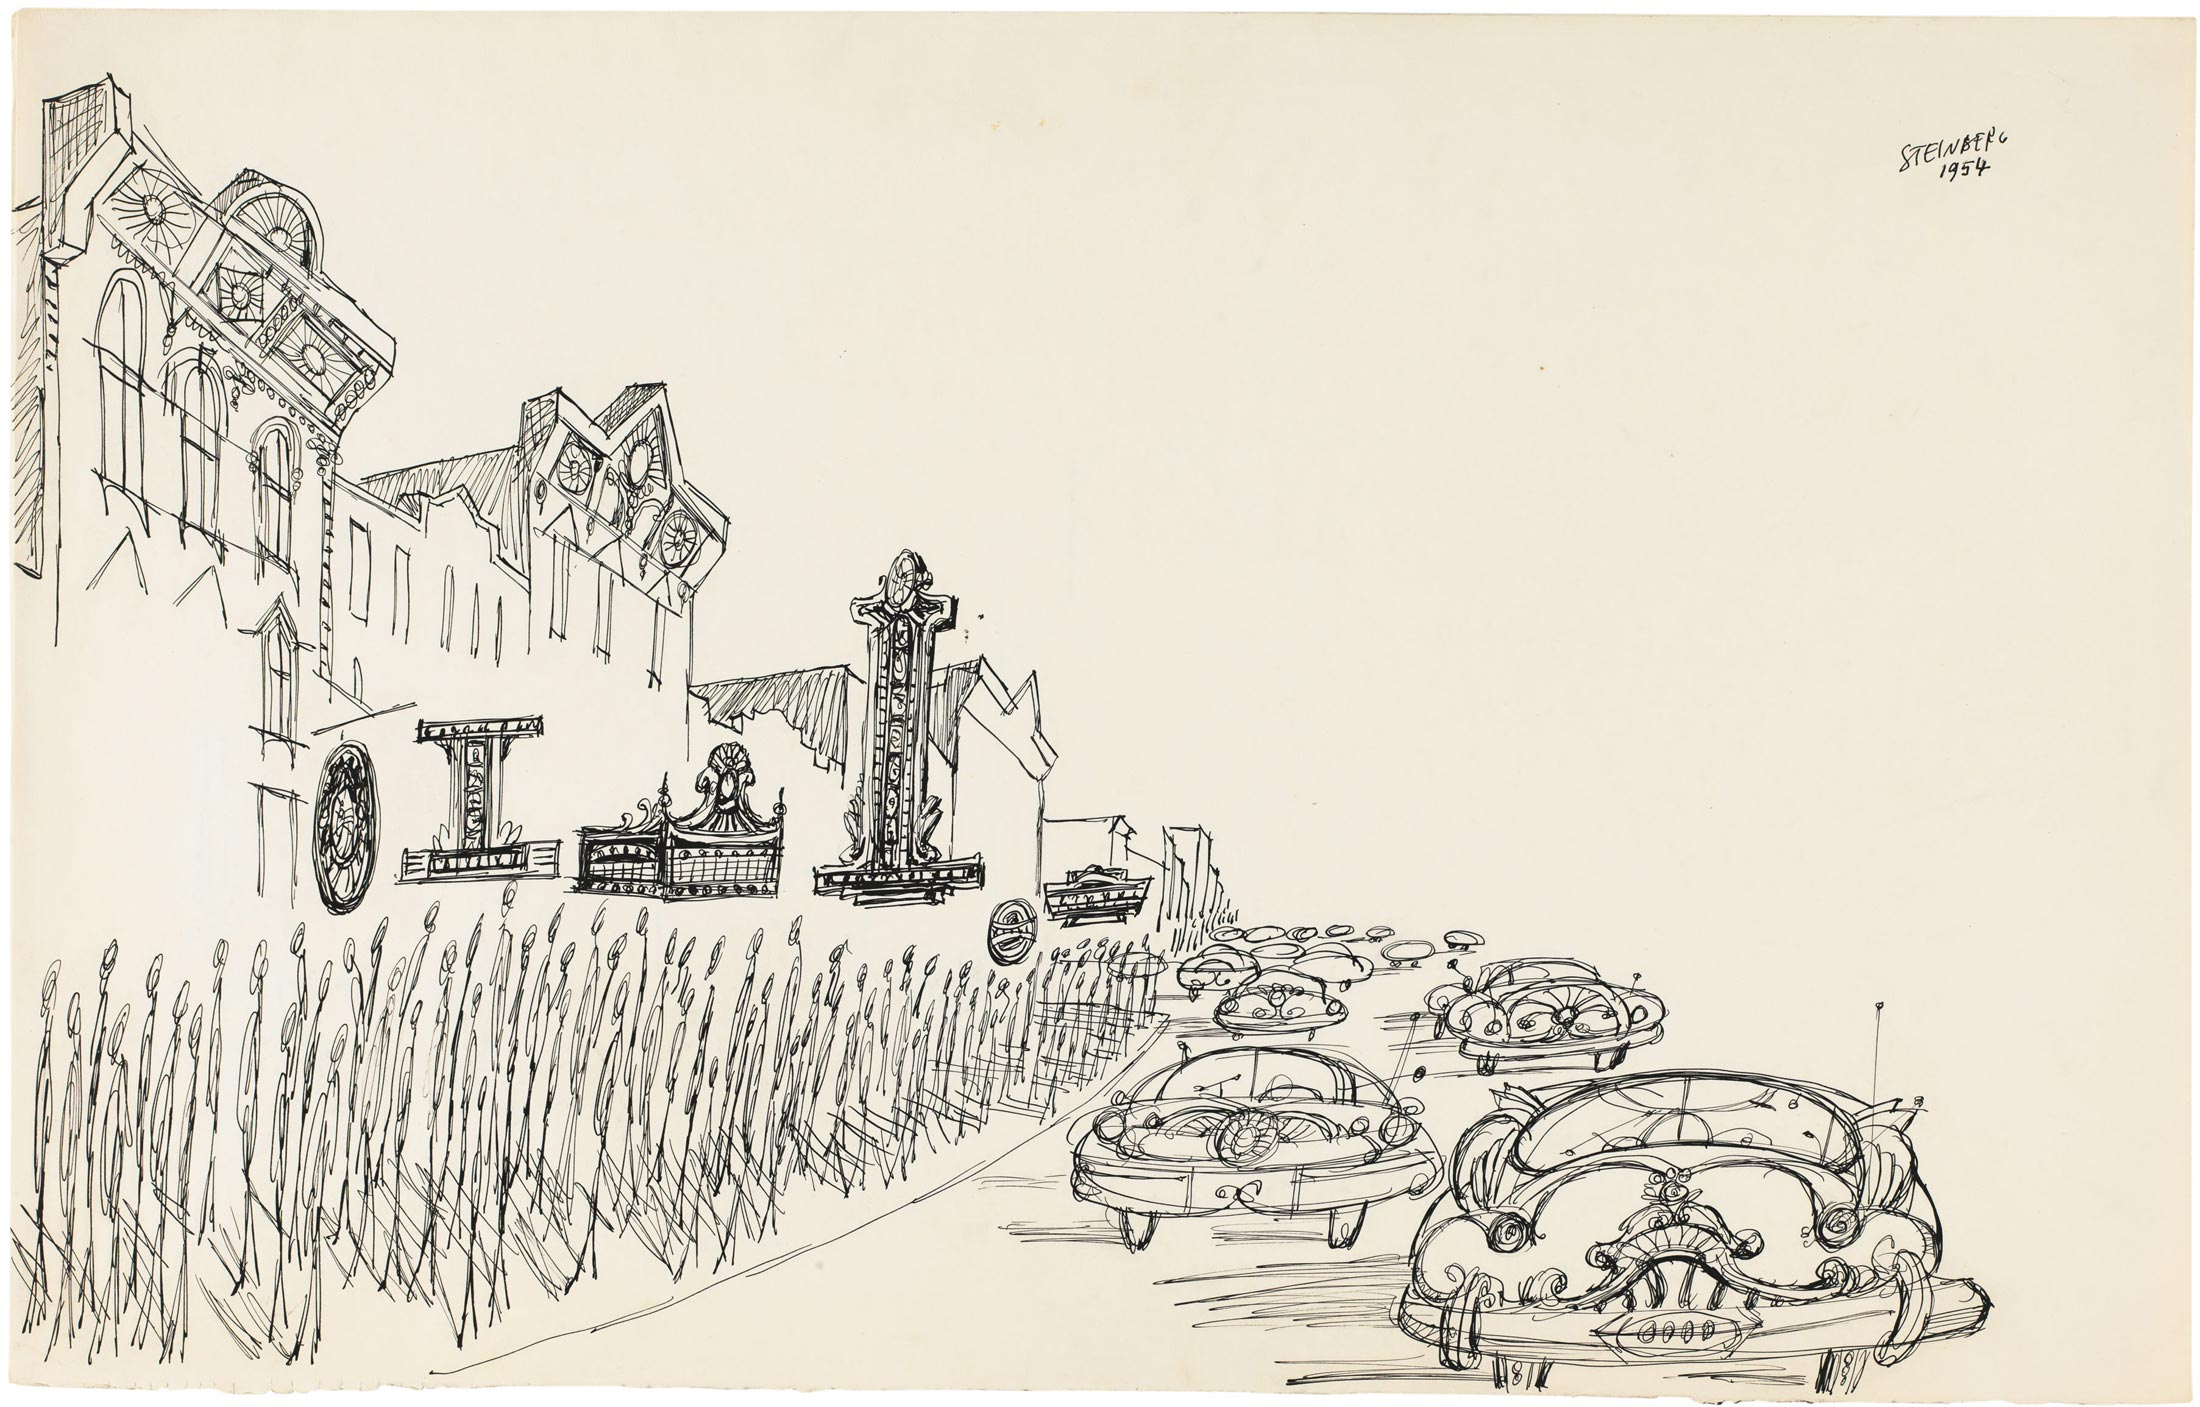 <em>Untitled</em>, 1954. Ink on paper, 14 ½ x 23 in. Minneapolis Institute of Art; Gift of The Saul Steinberg Foundation.